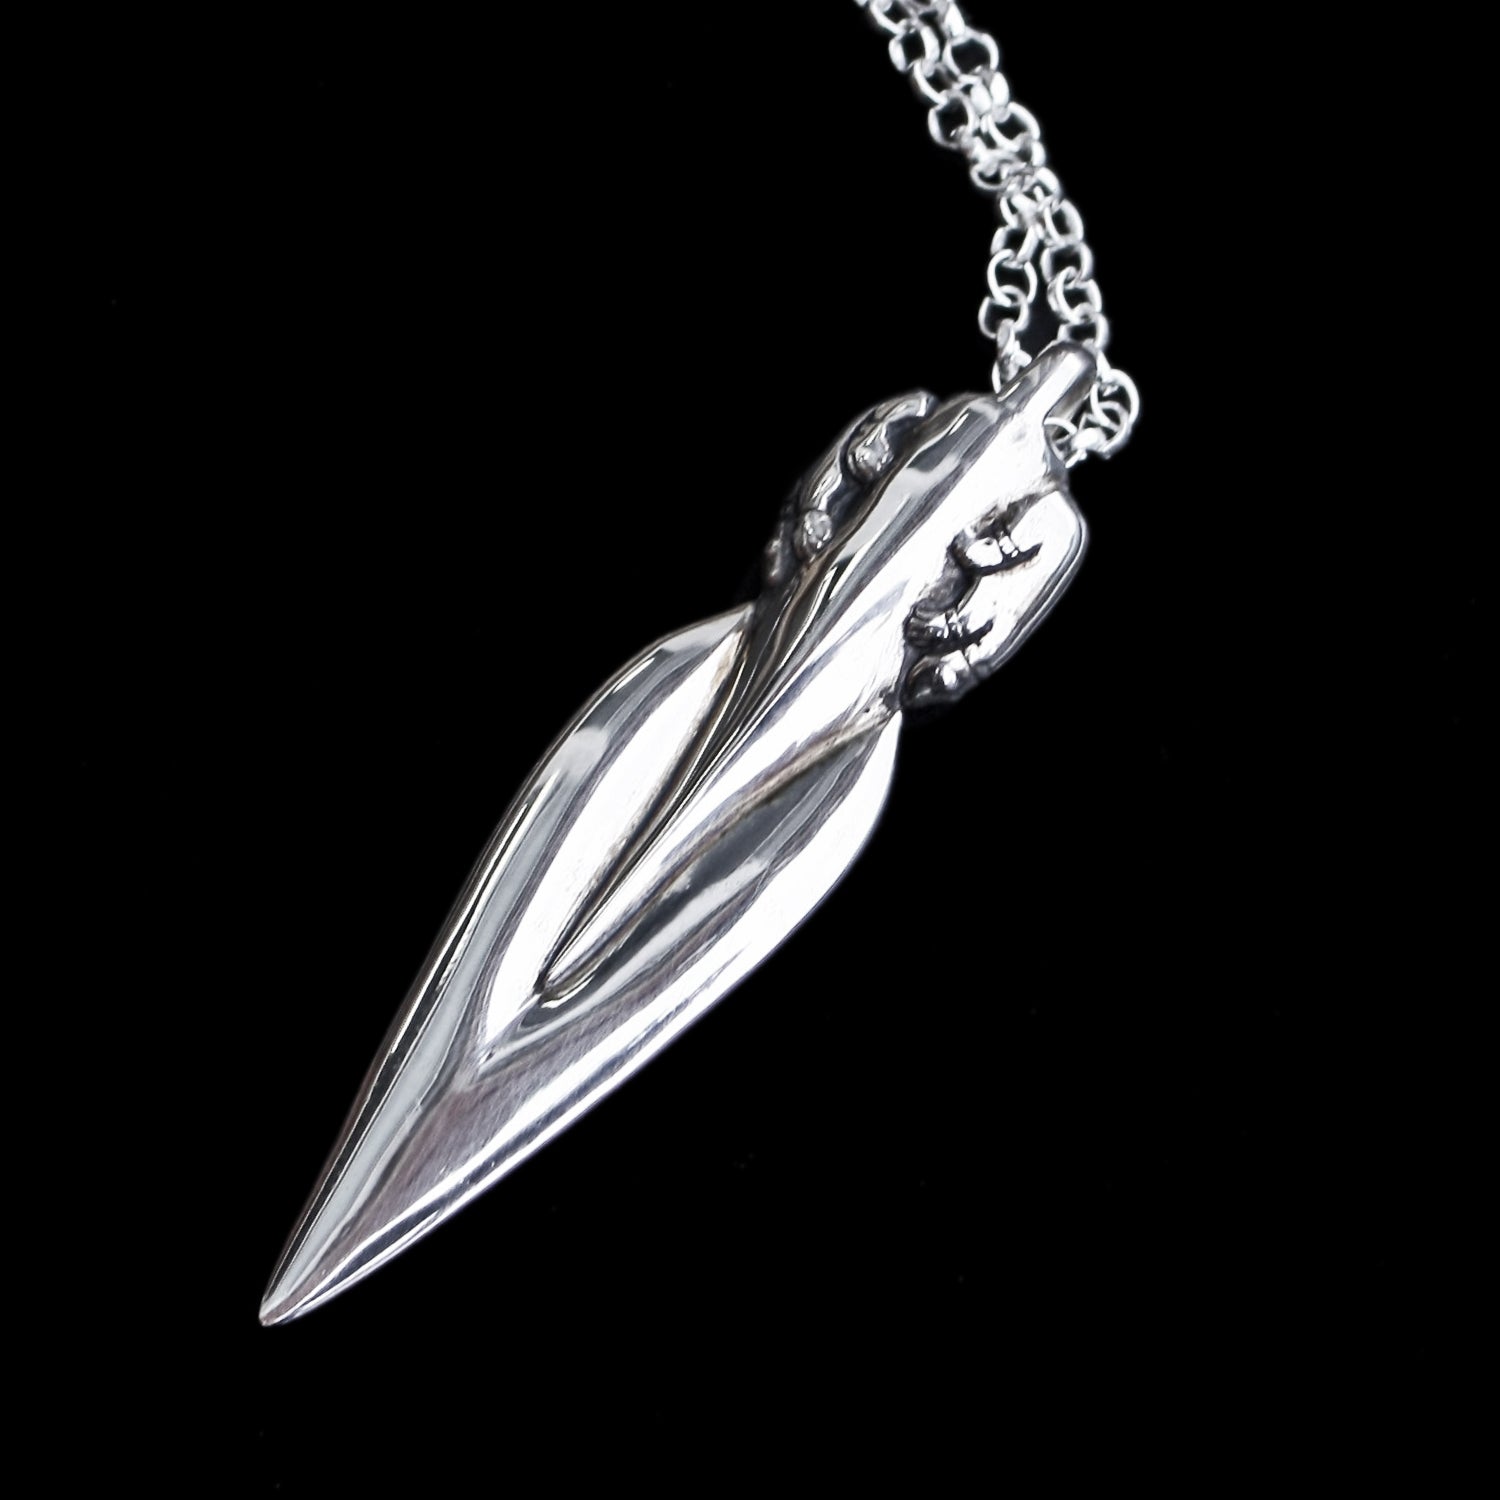 Large Viking Bear Spear Pendant - Silver on Silver Anchor Chain